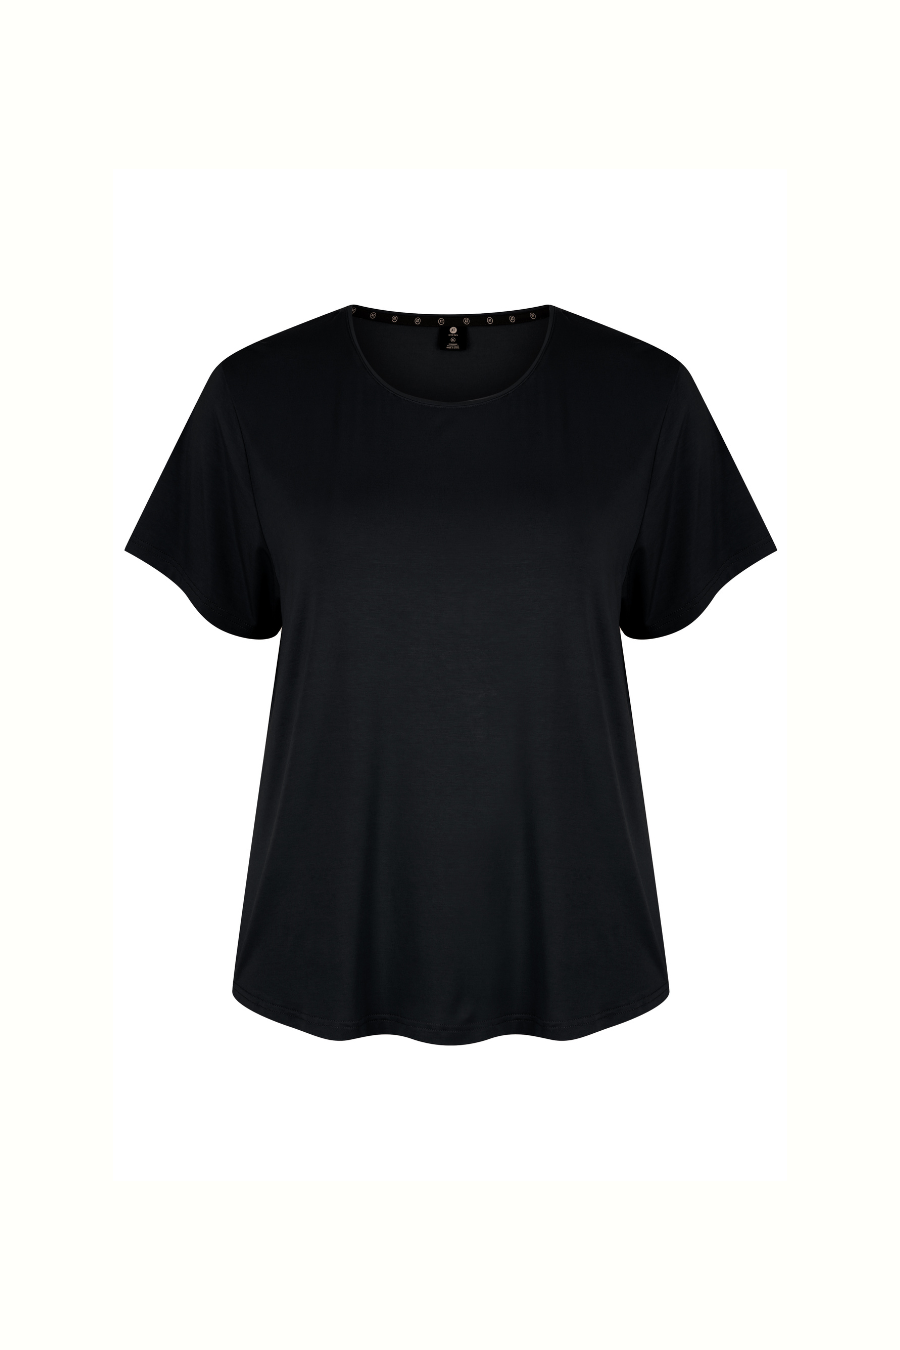 Classic Bamboo T-Shirt - Black from Active Truth™
